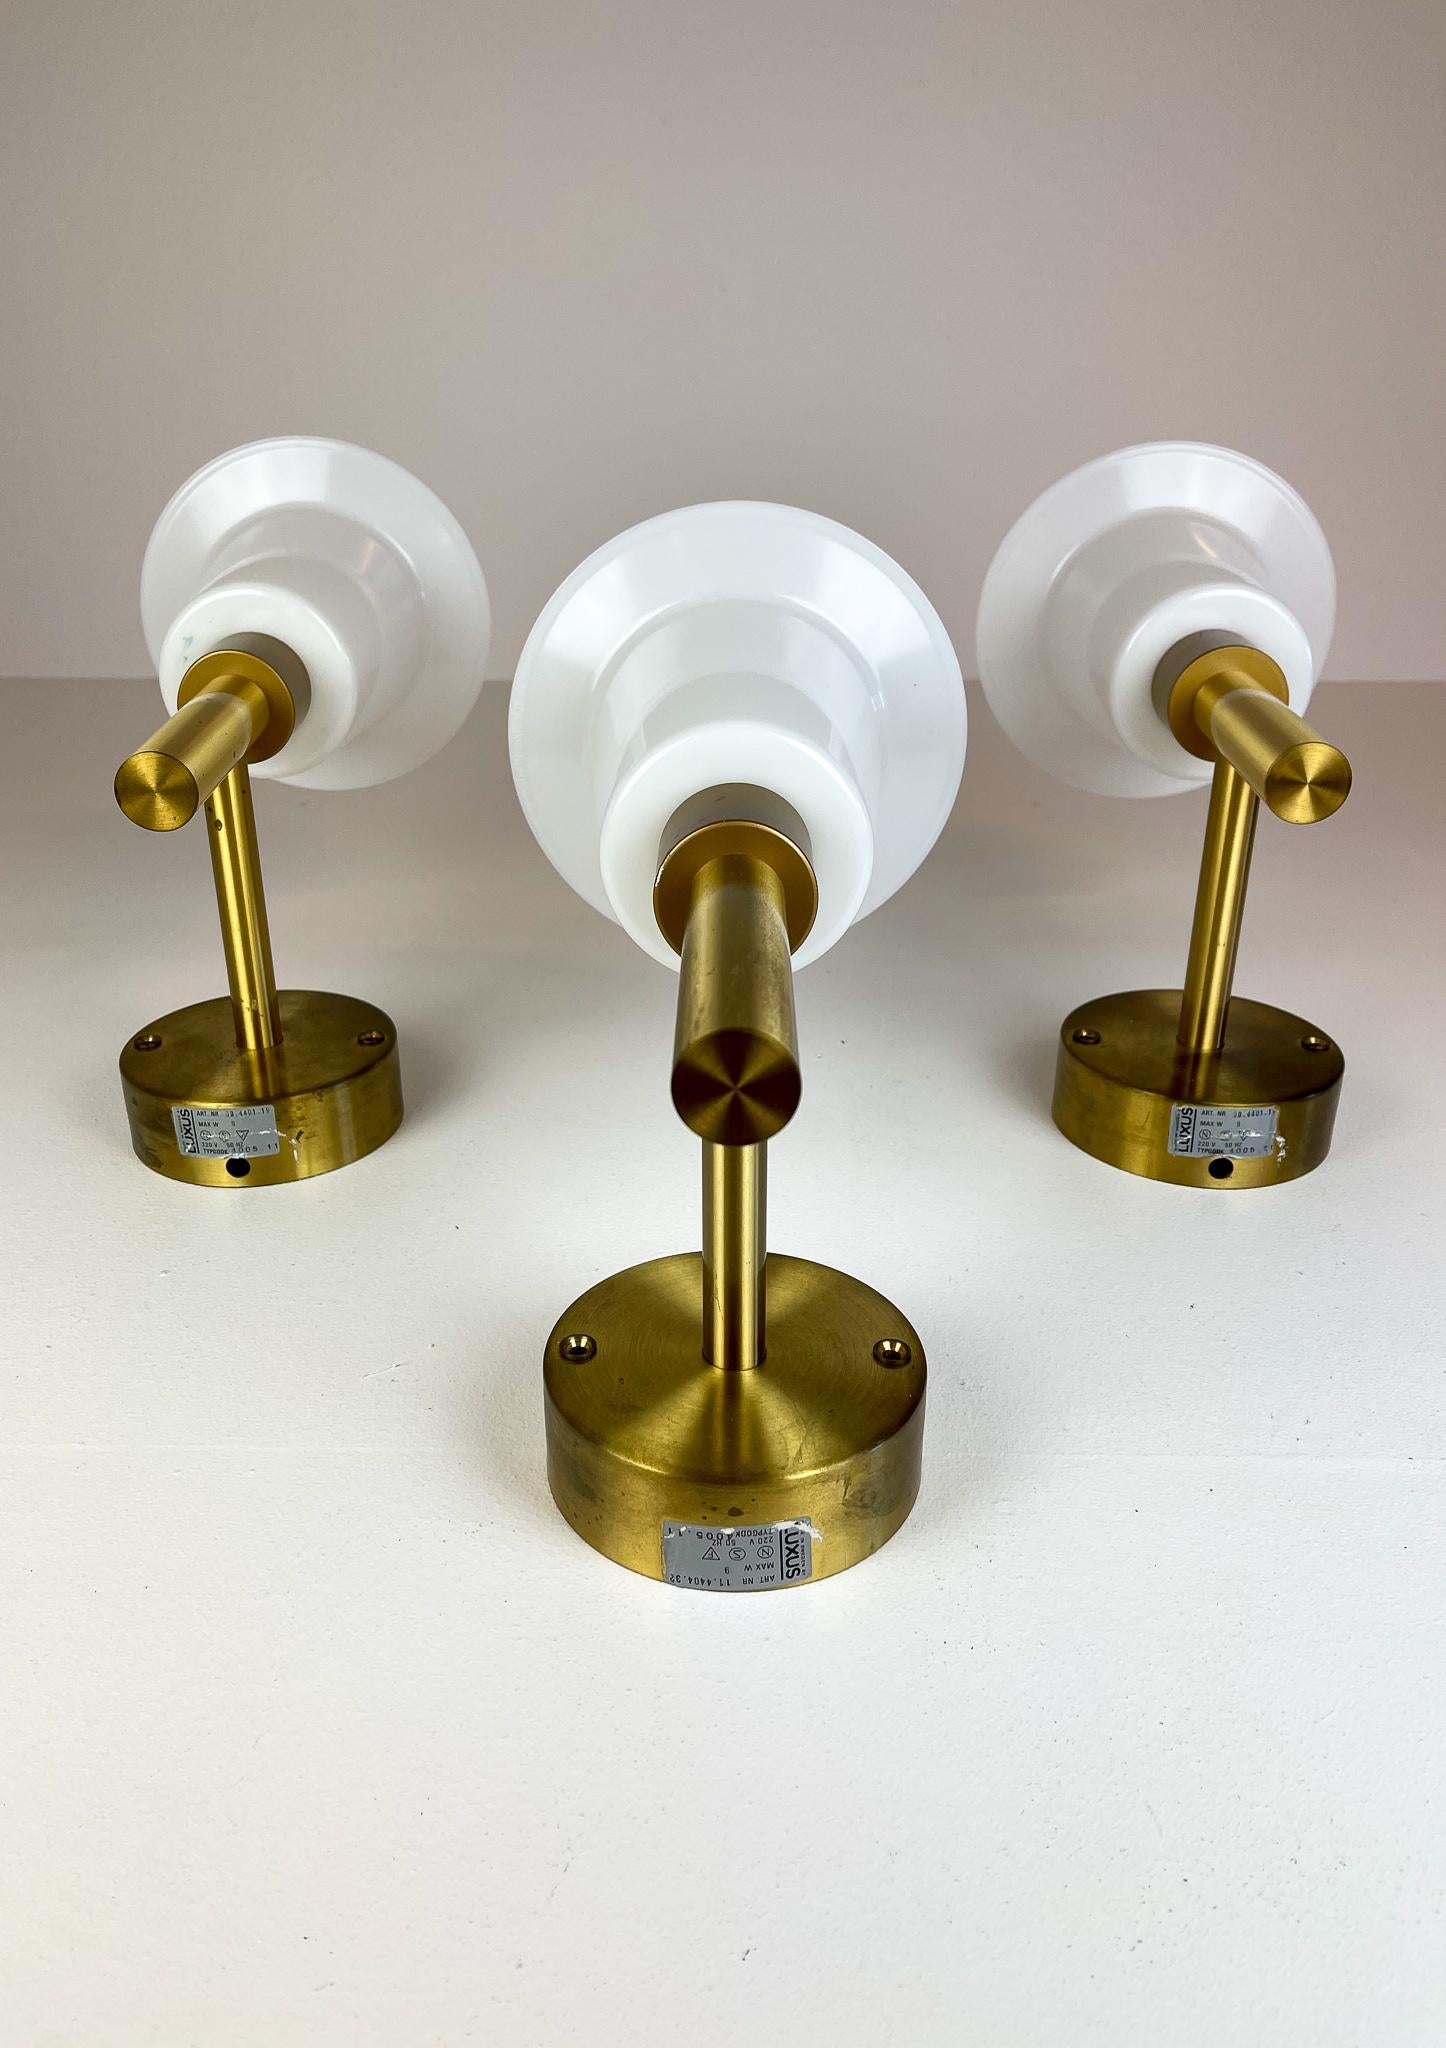 Midcentury Wall-Mounted Brass and Acrylic Lamps Luxus, Sweden, 1960s In Good Condition For Sale In Hillringsberg, SE